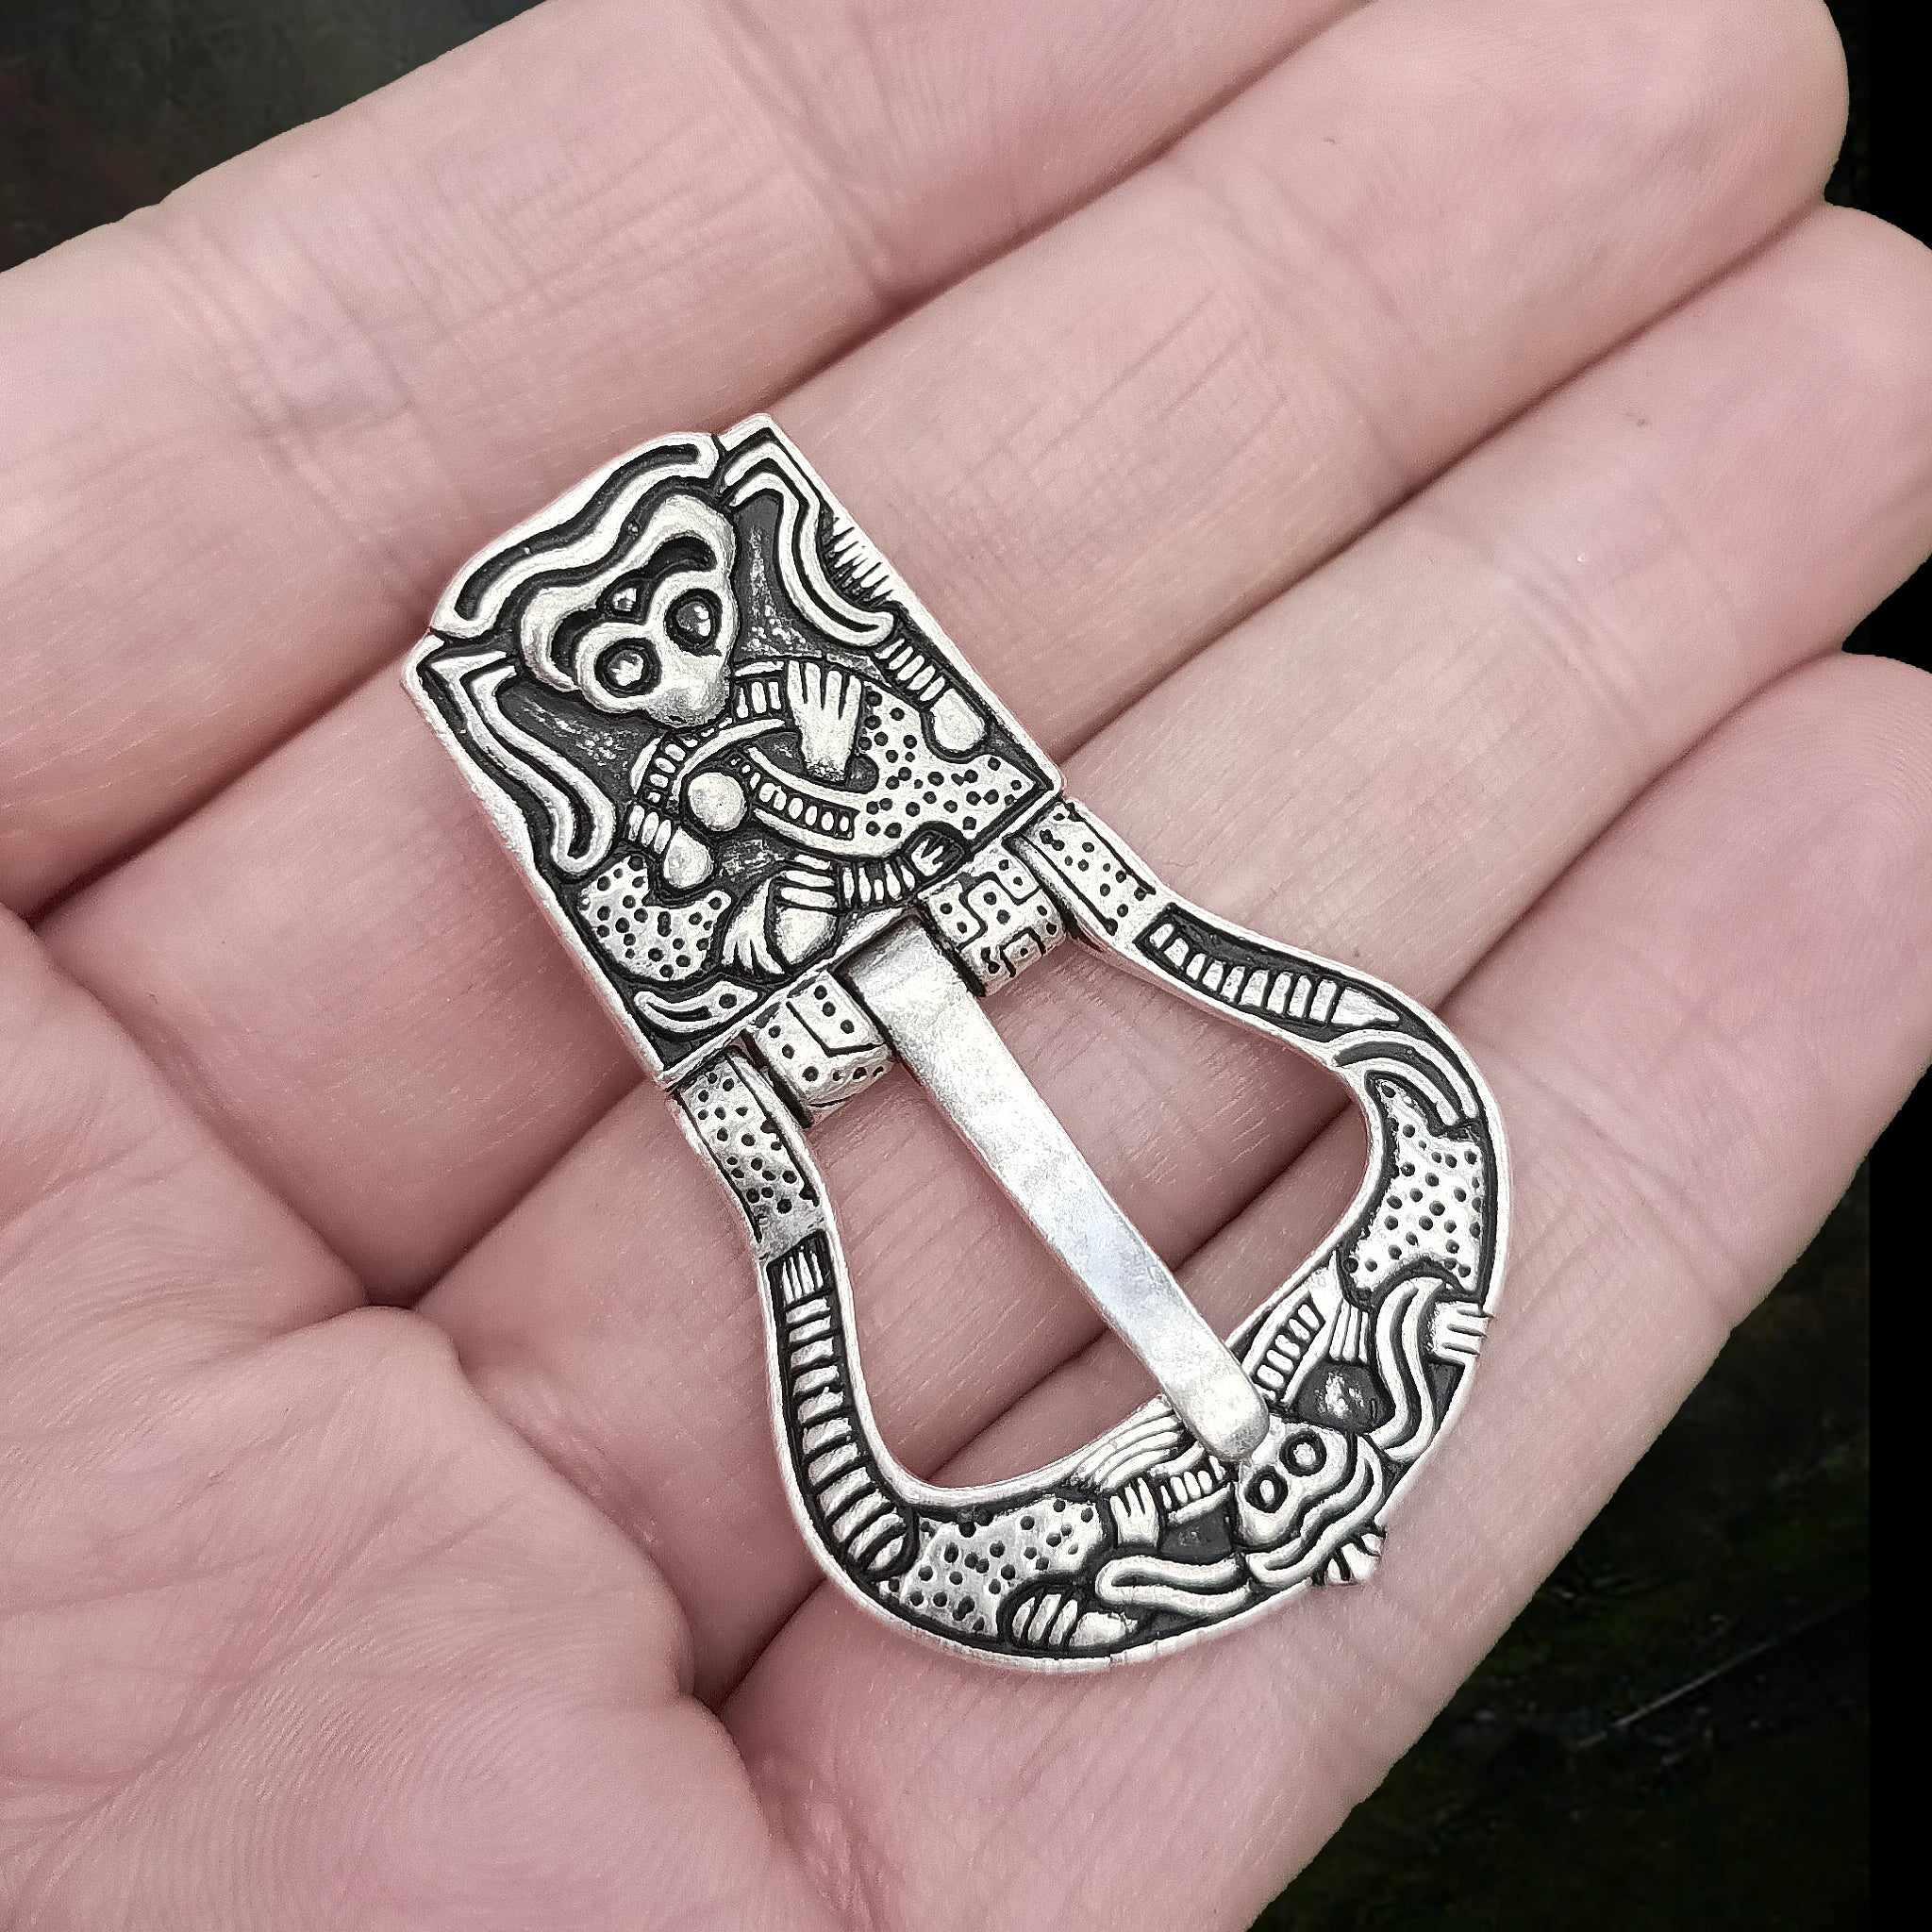 Silver Plated Borre Style Gripping Beast Viking Buckle on Hand